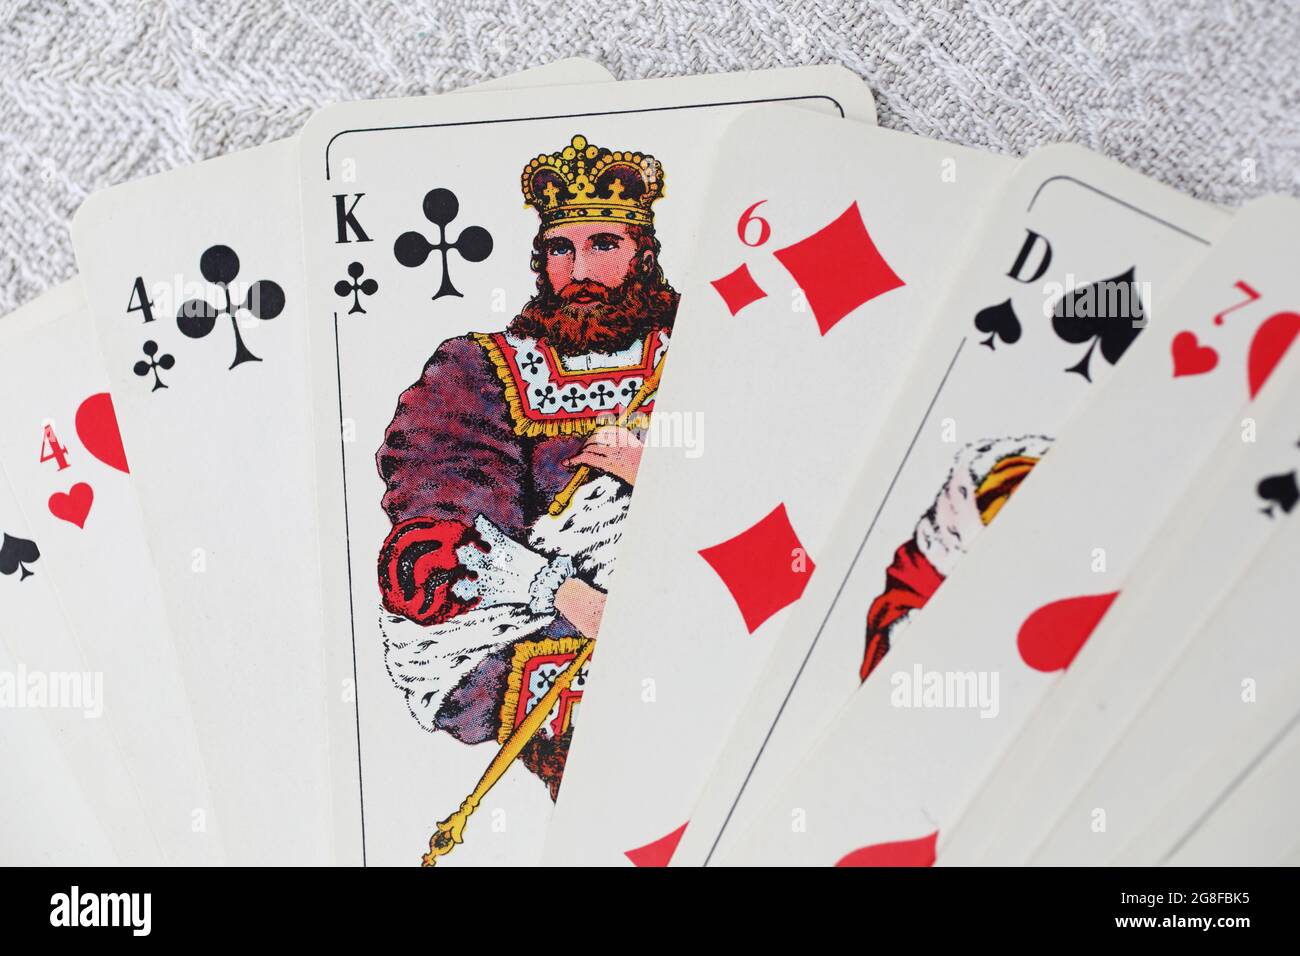 Deck of cards in a home, king of clubs. Stock Photo